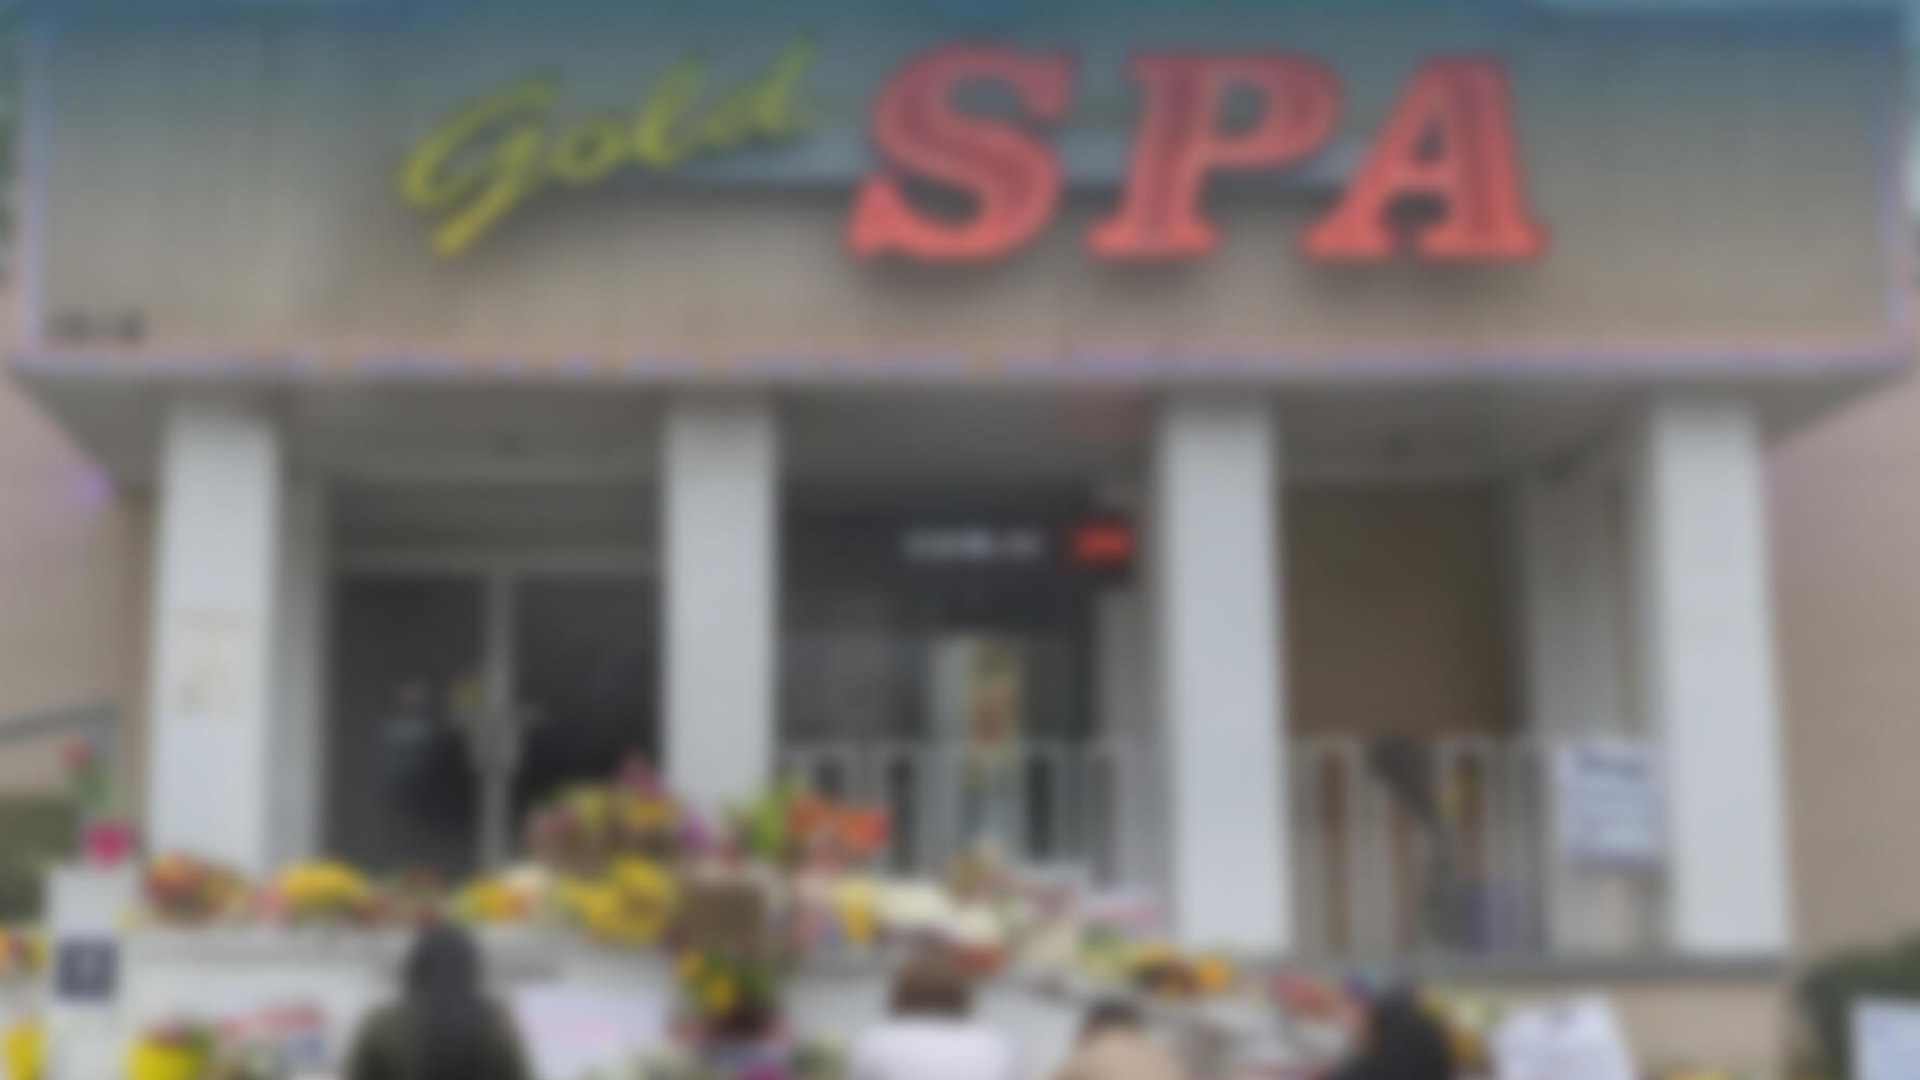 Unfocused shot of the Gold Spa.